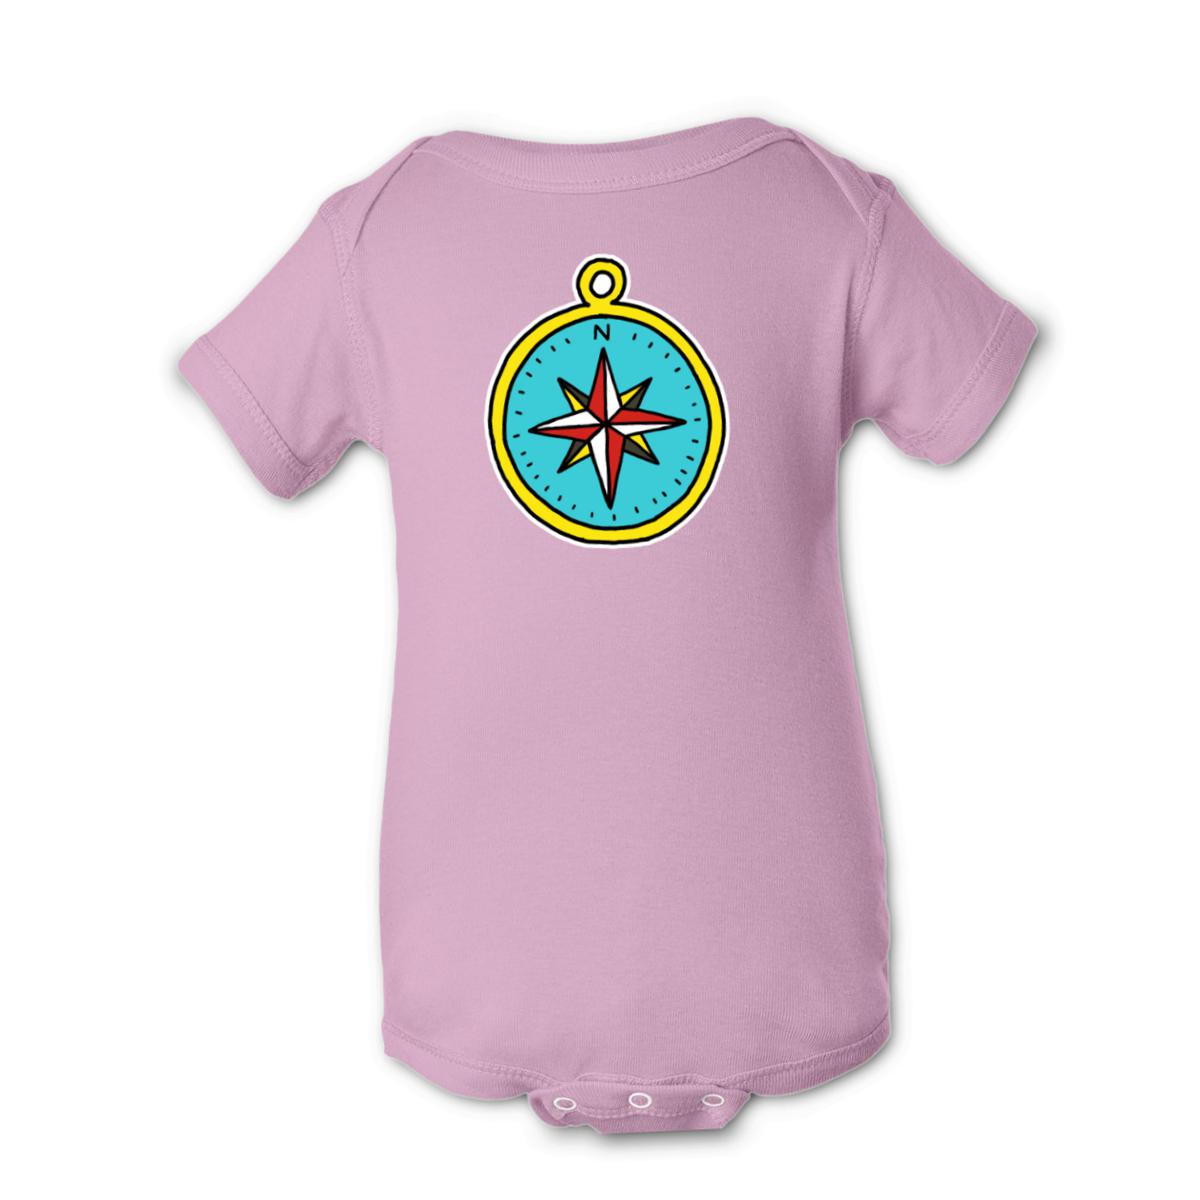 American Traditional Compass Onesie 18M pink